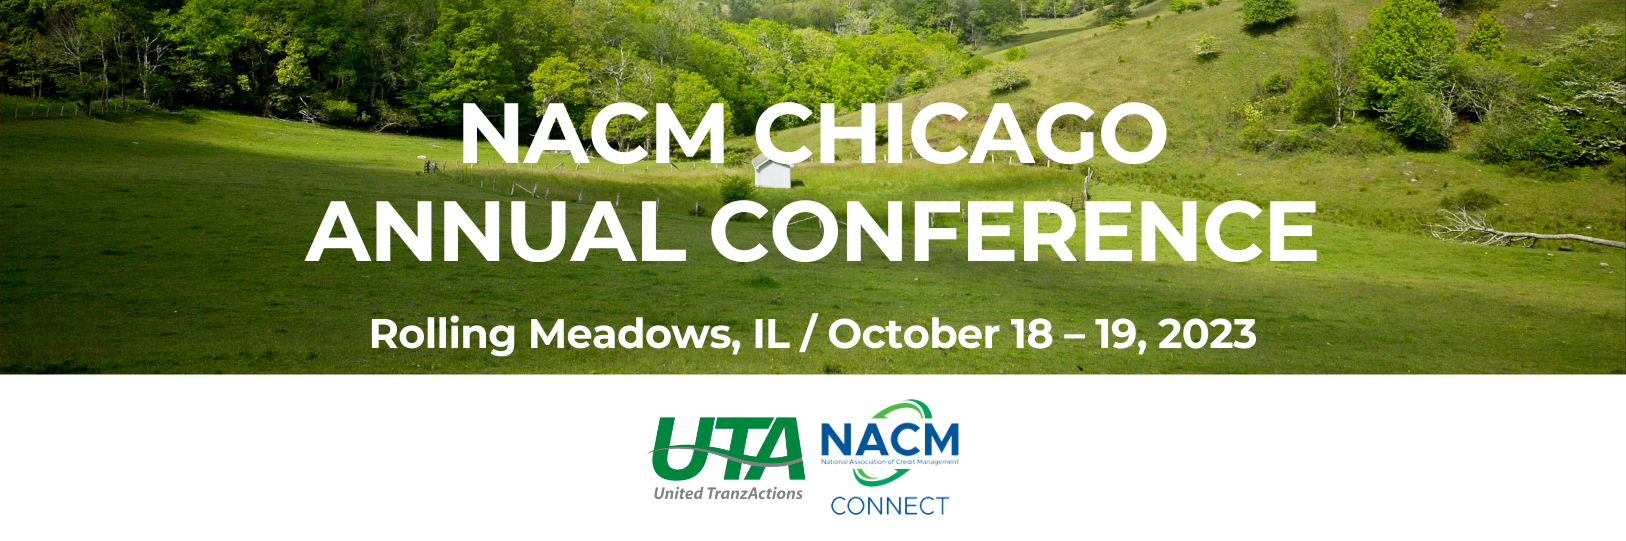 NACM Chicago: Annual Conference - Rolling Meadows, IL. October 18 –19, 2023